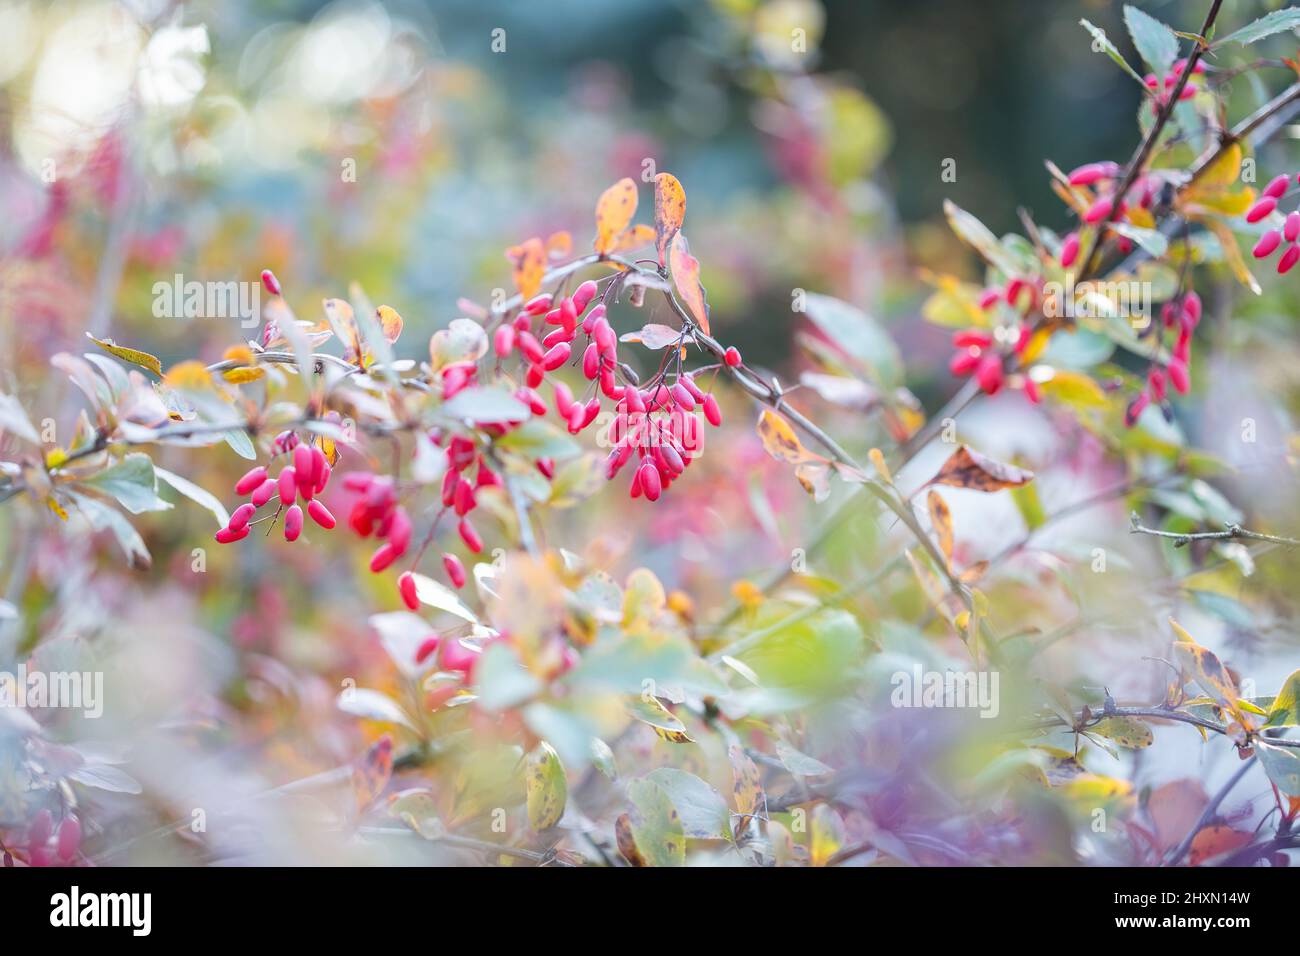 Ripe red Barberry fruits on bush branches in autumn, barberry close up, berberis vulgaris Stock Photo